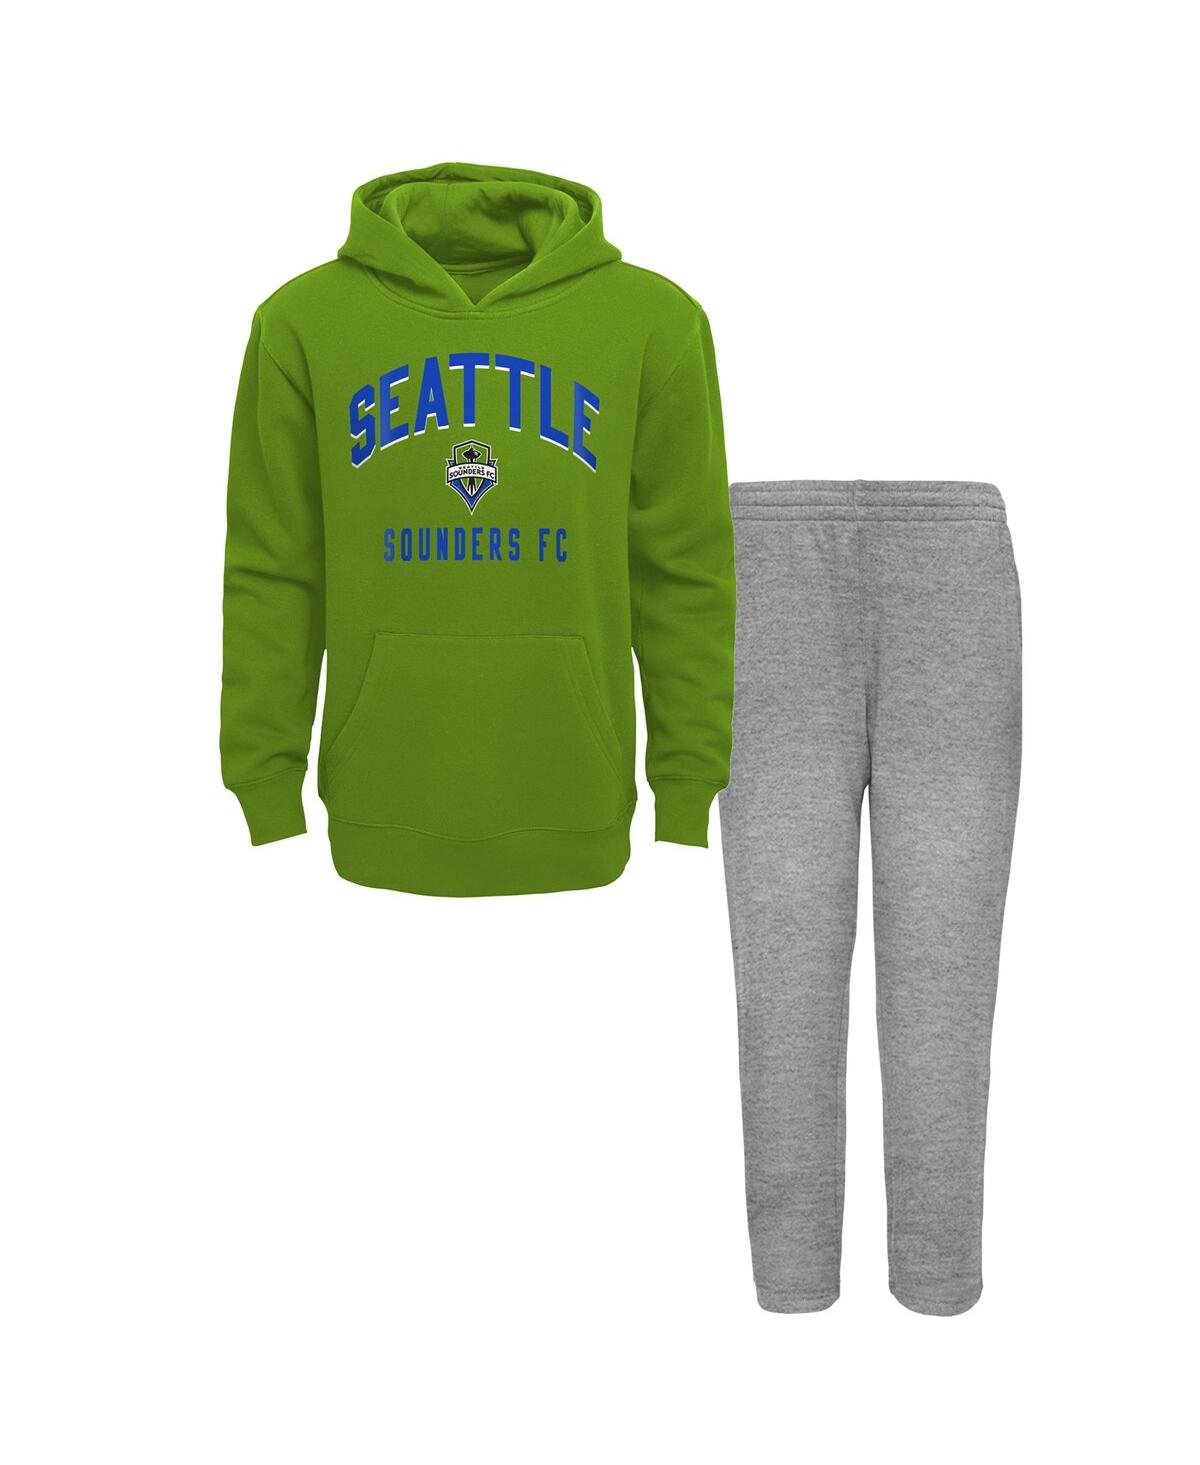 Outerstuff Kids' Big Boys Green, Gray Seattle Sounders Fc Play-by-play Pullover Fleece Hoodie And Pants Set In Green,gray